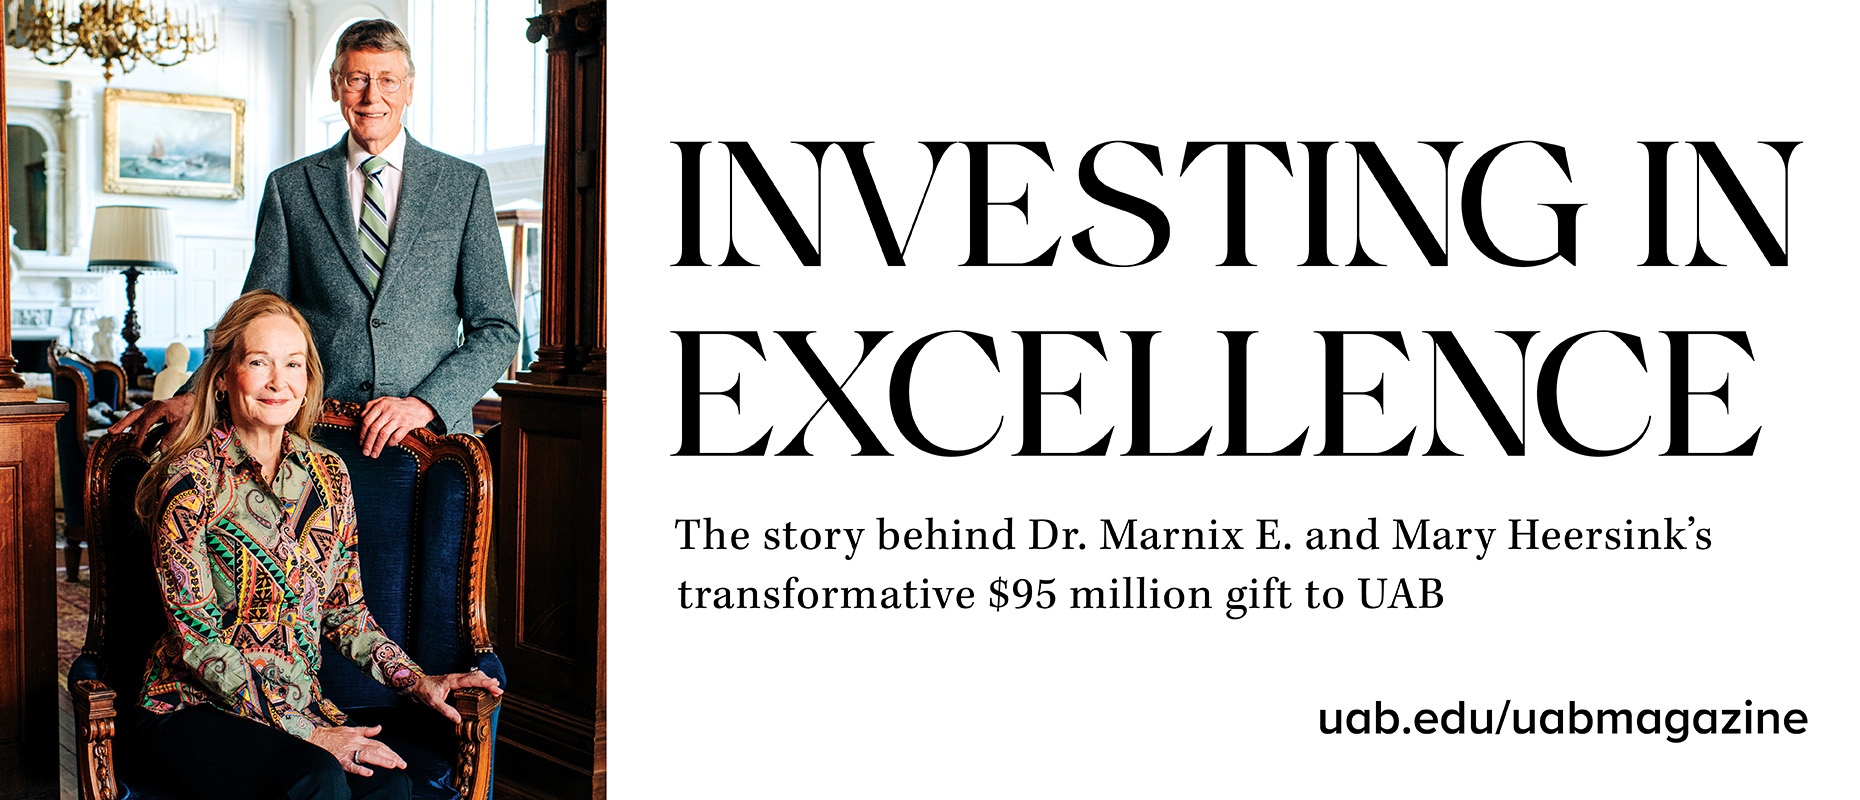 Investing in Excellence: The story behind Dr. Marnix E. and Mary Heersink's transformative $95 million gift to UAB